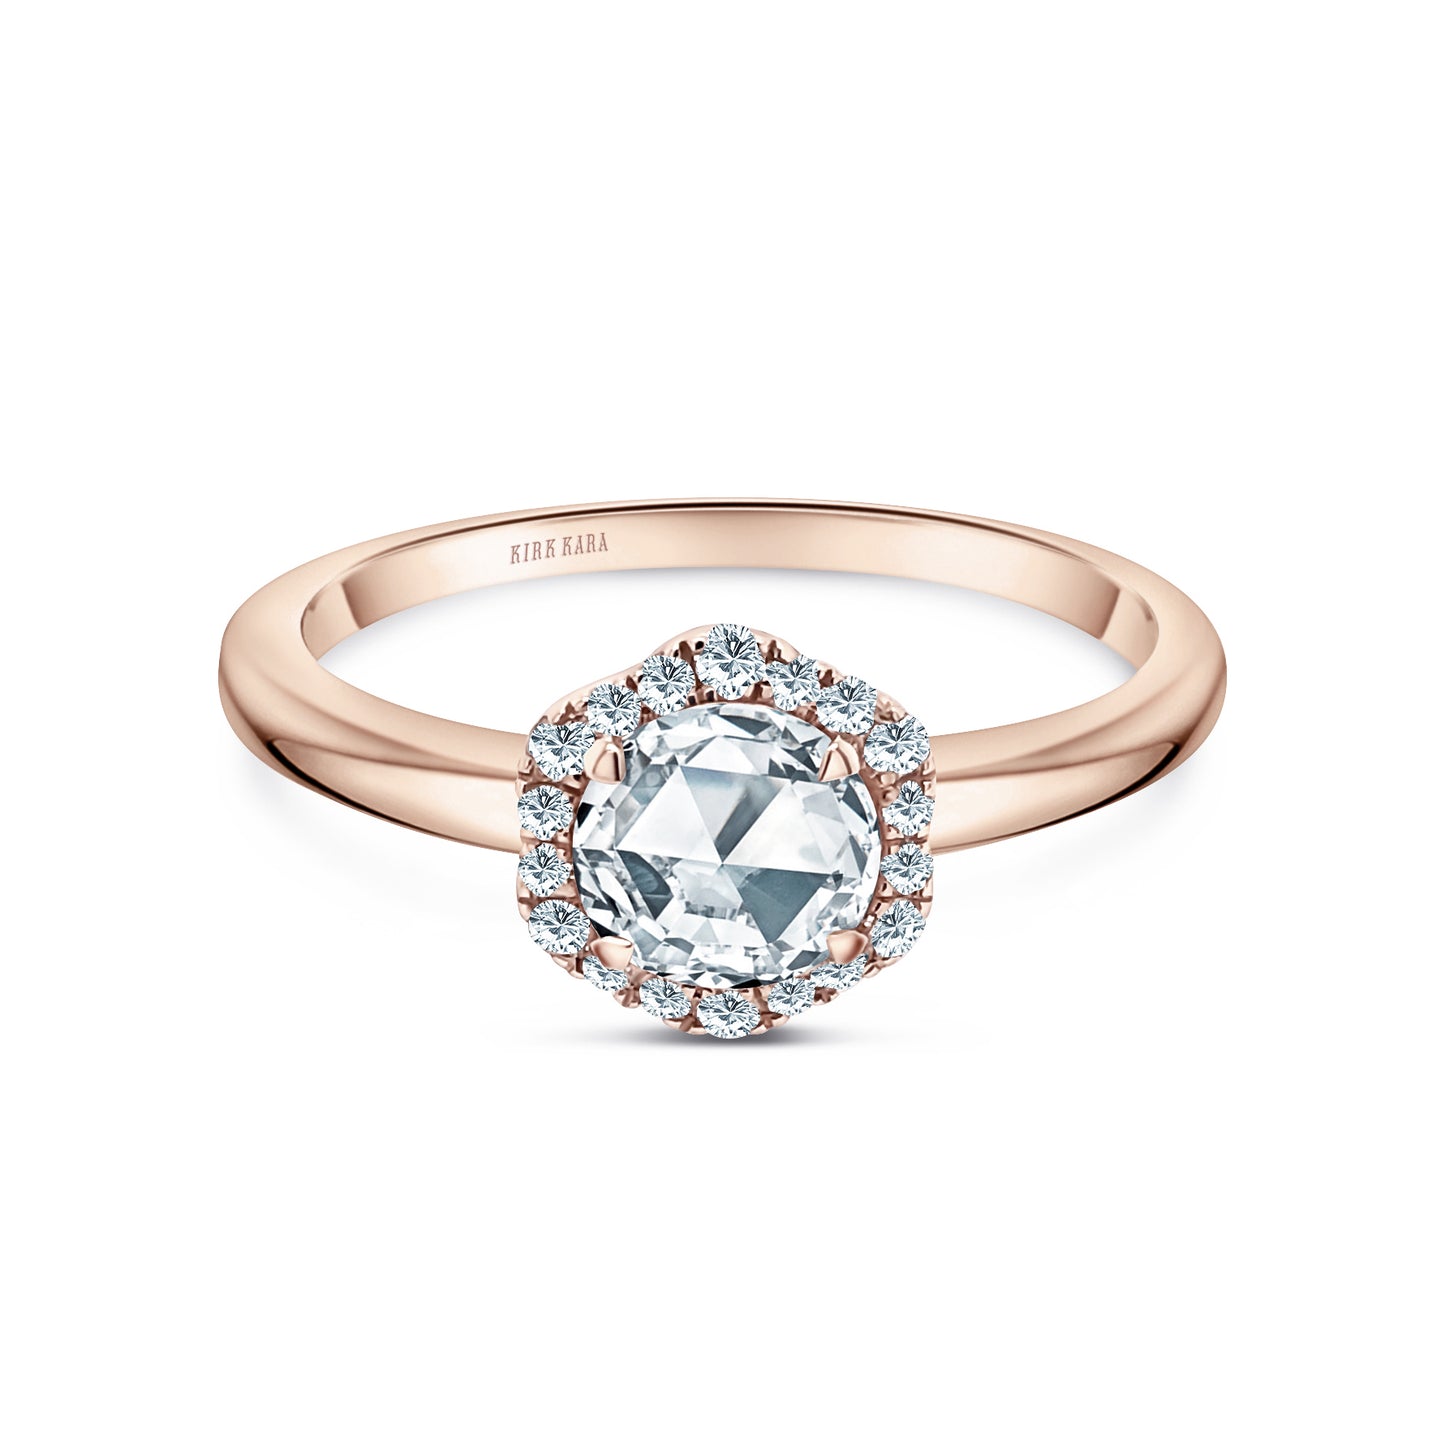 14K Rose Gold Floral Delicate Rose Cut Halo Diamond Engagement Ring